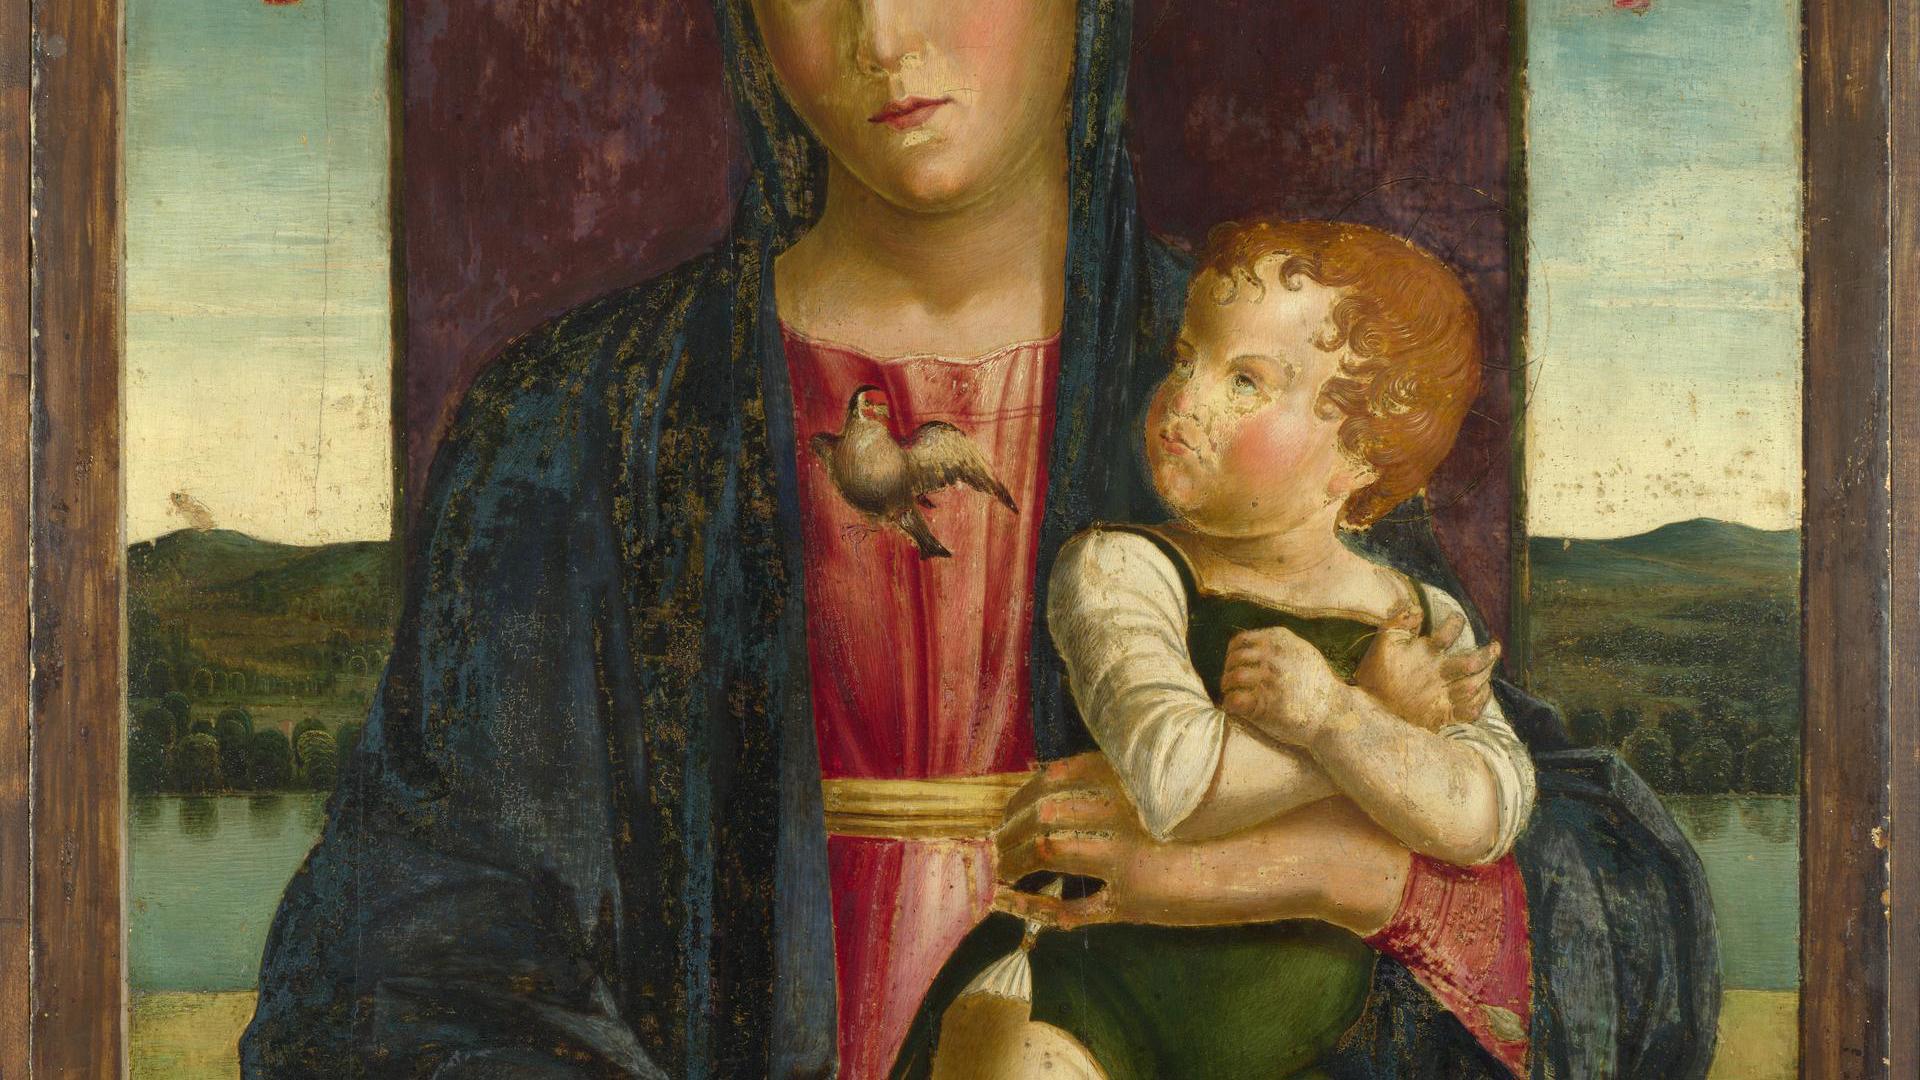 The Virgin and Child by Lazzaro Bastiani